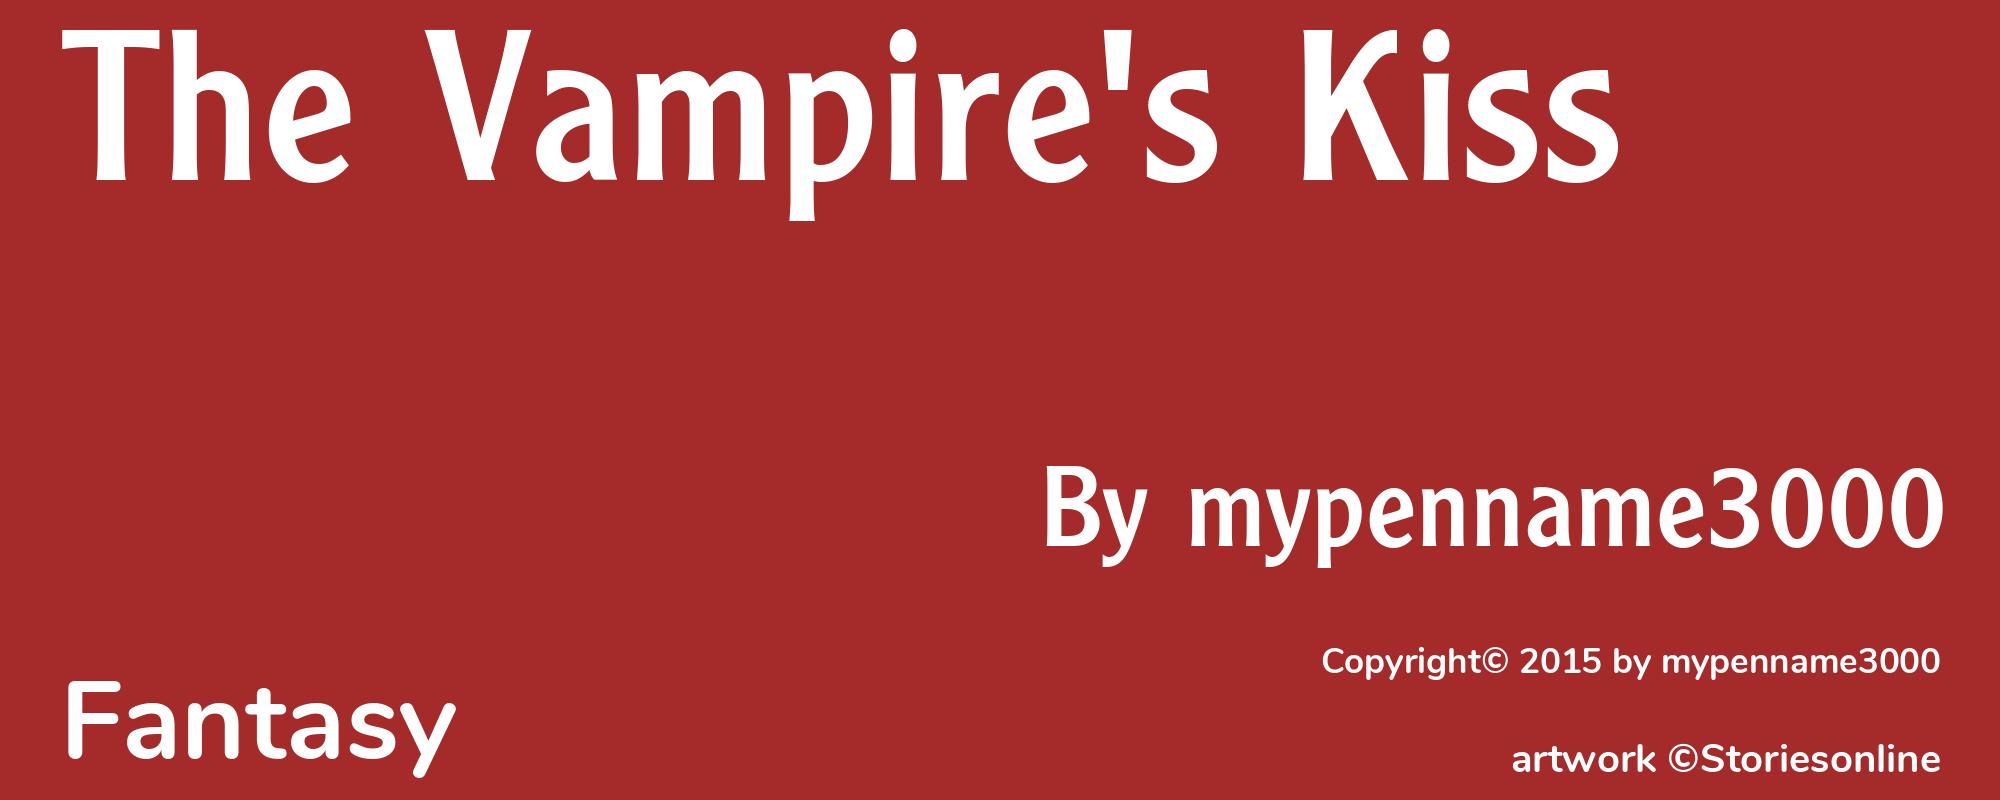 The Vampire's Kiss - Cover